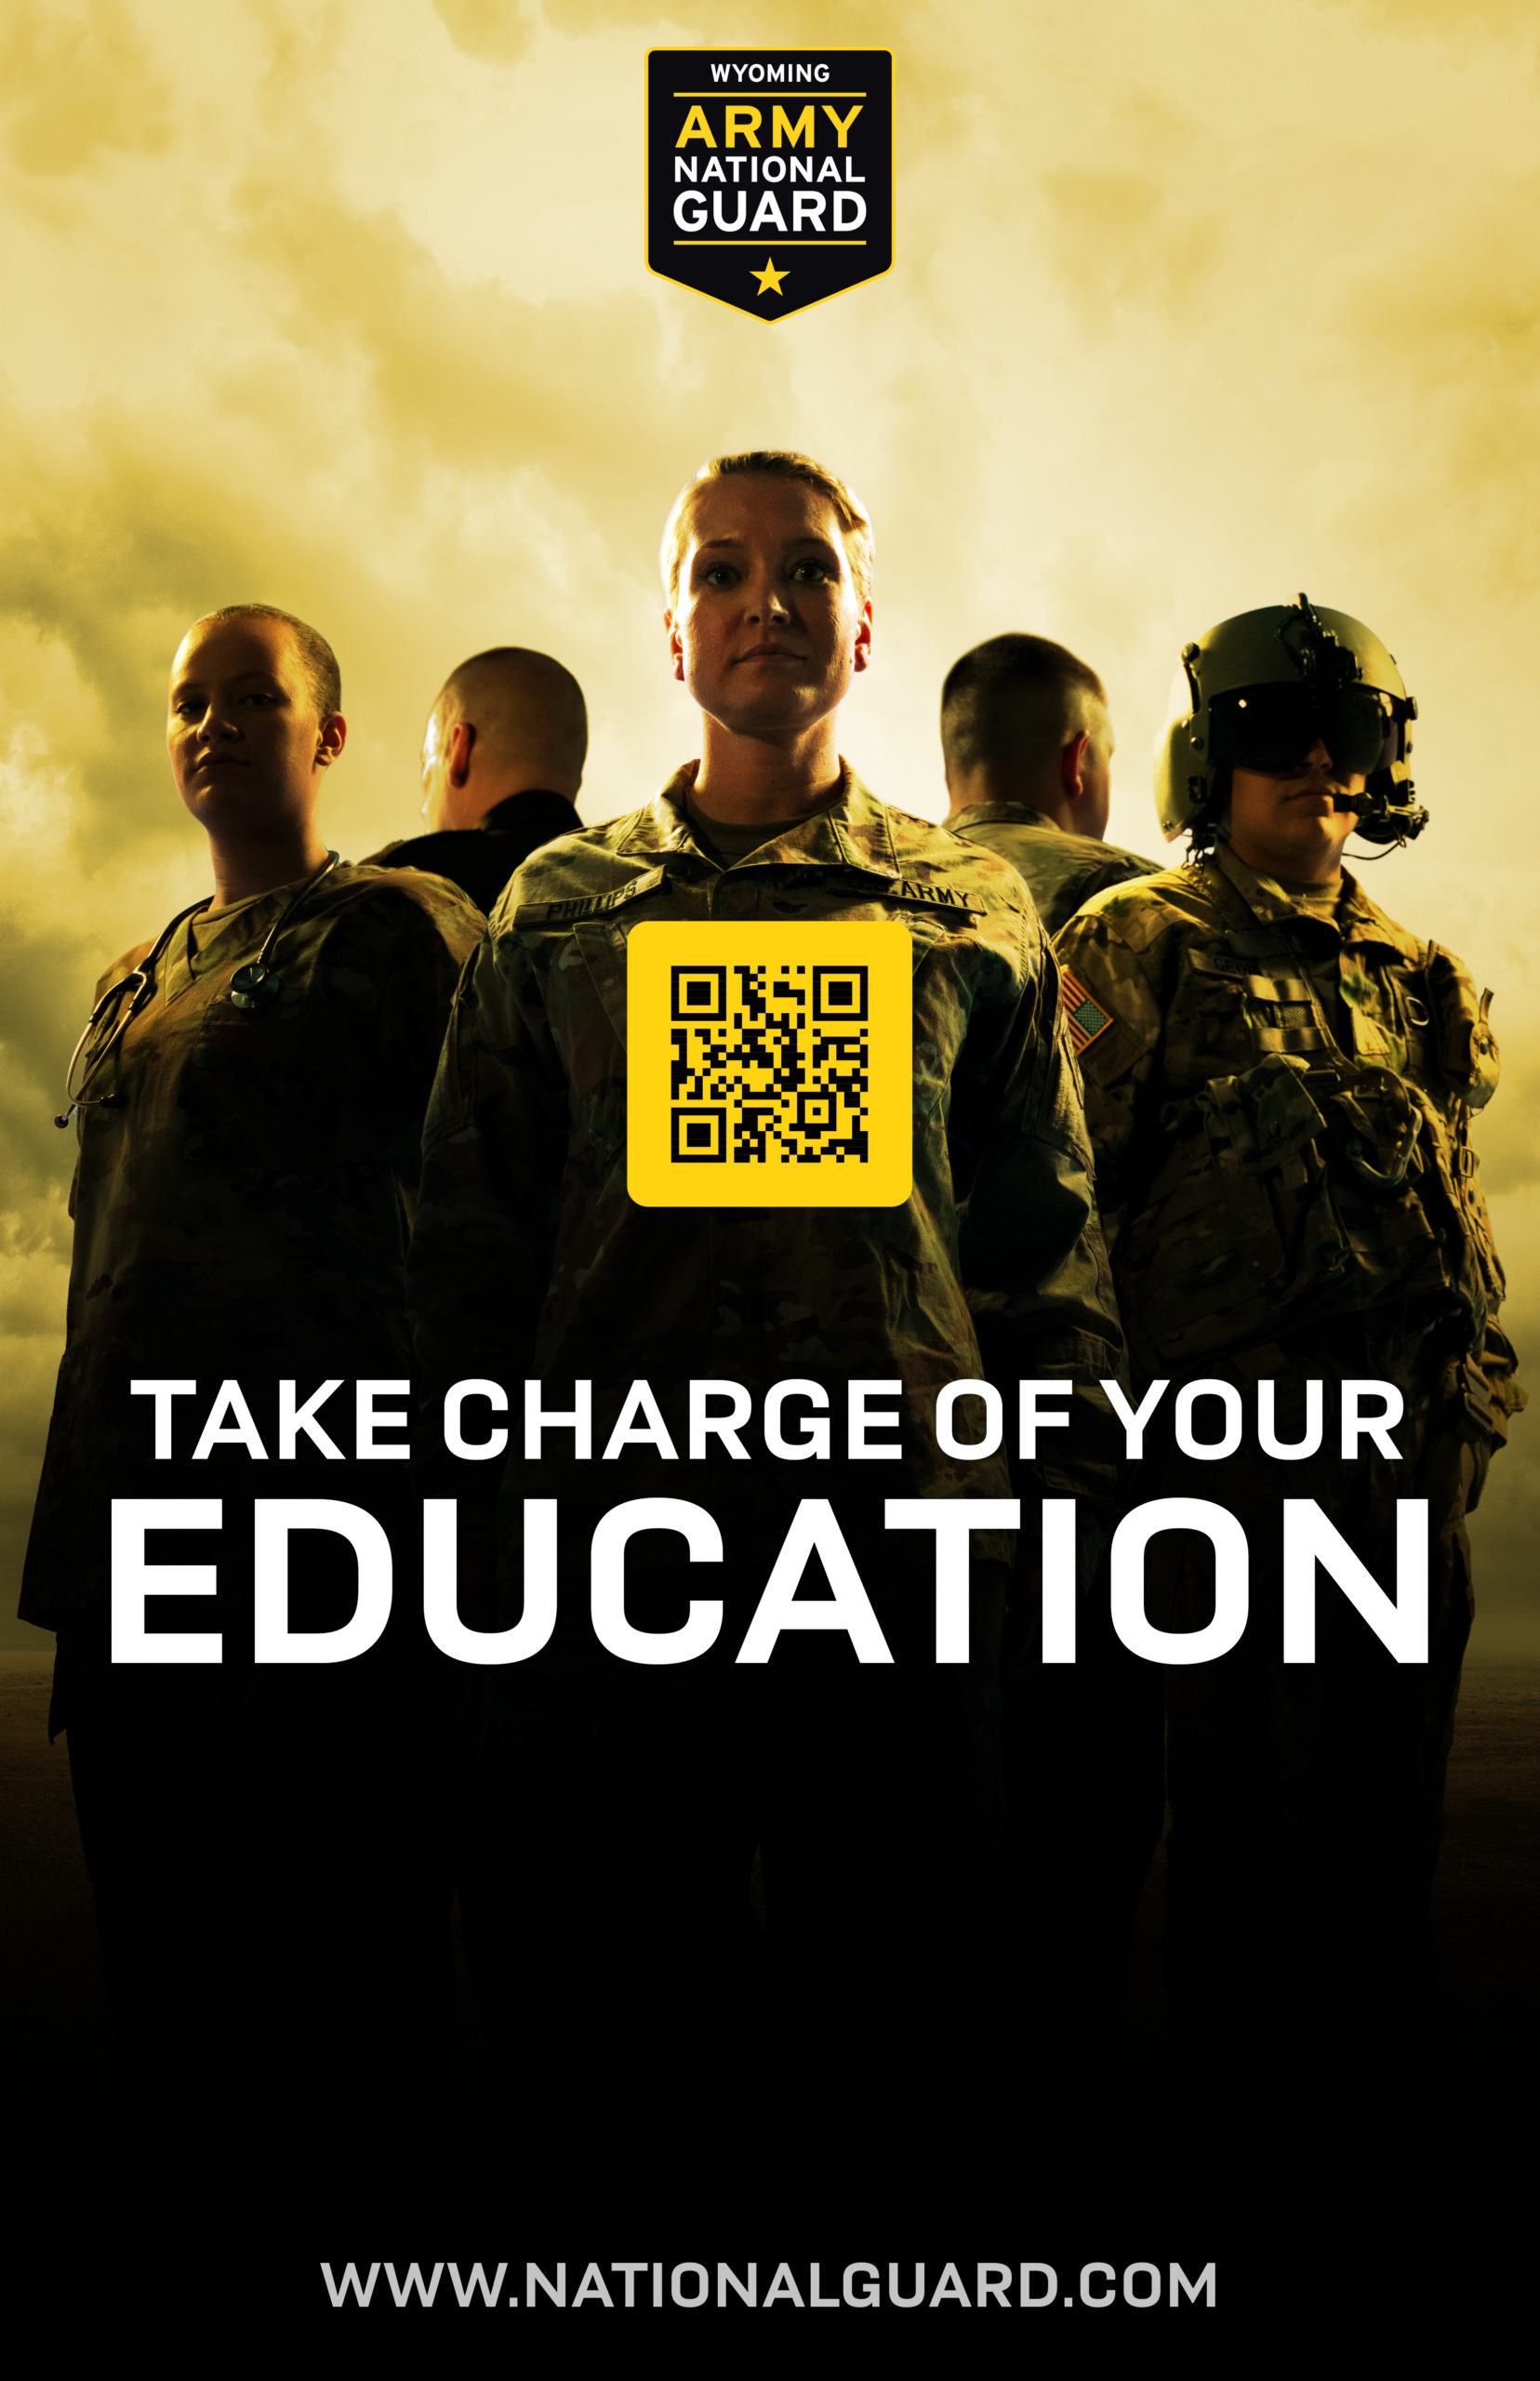 Poster with people dressed in National Guard Uniforms against a yellow background. The text reads "Take charge of your education"